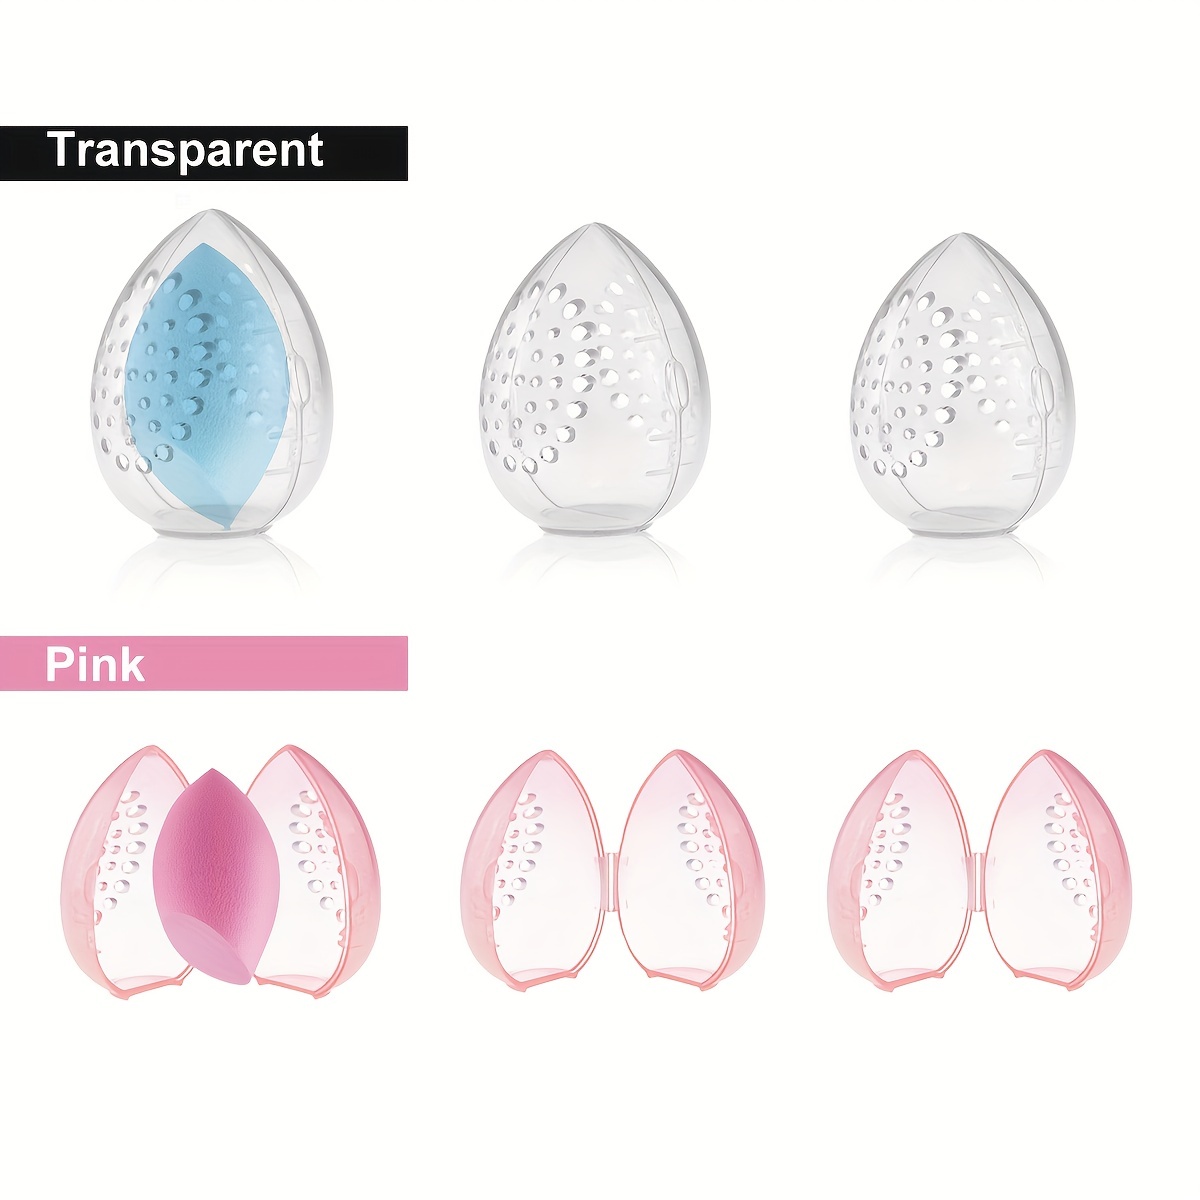 5 Colors Hygienic Silicone Makeup Sponge Holder